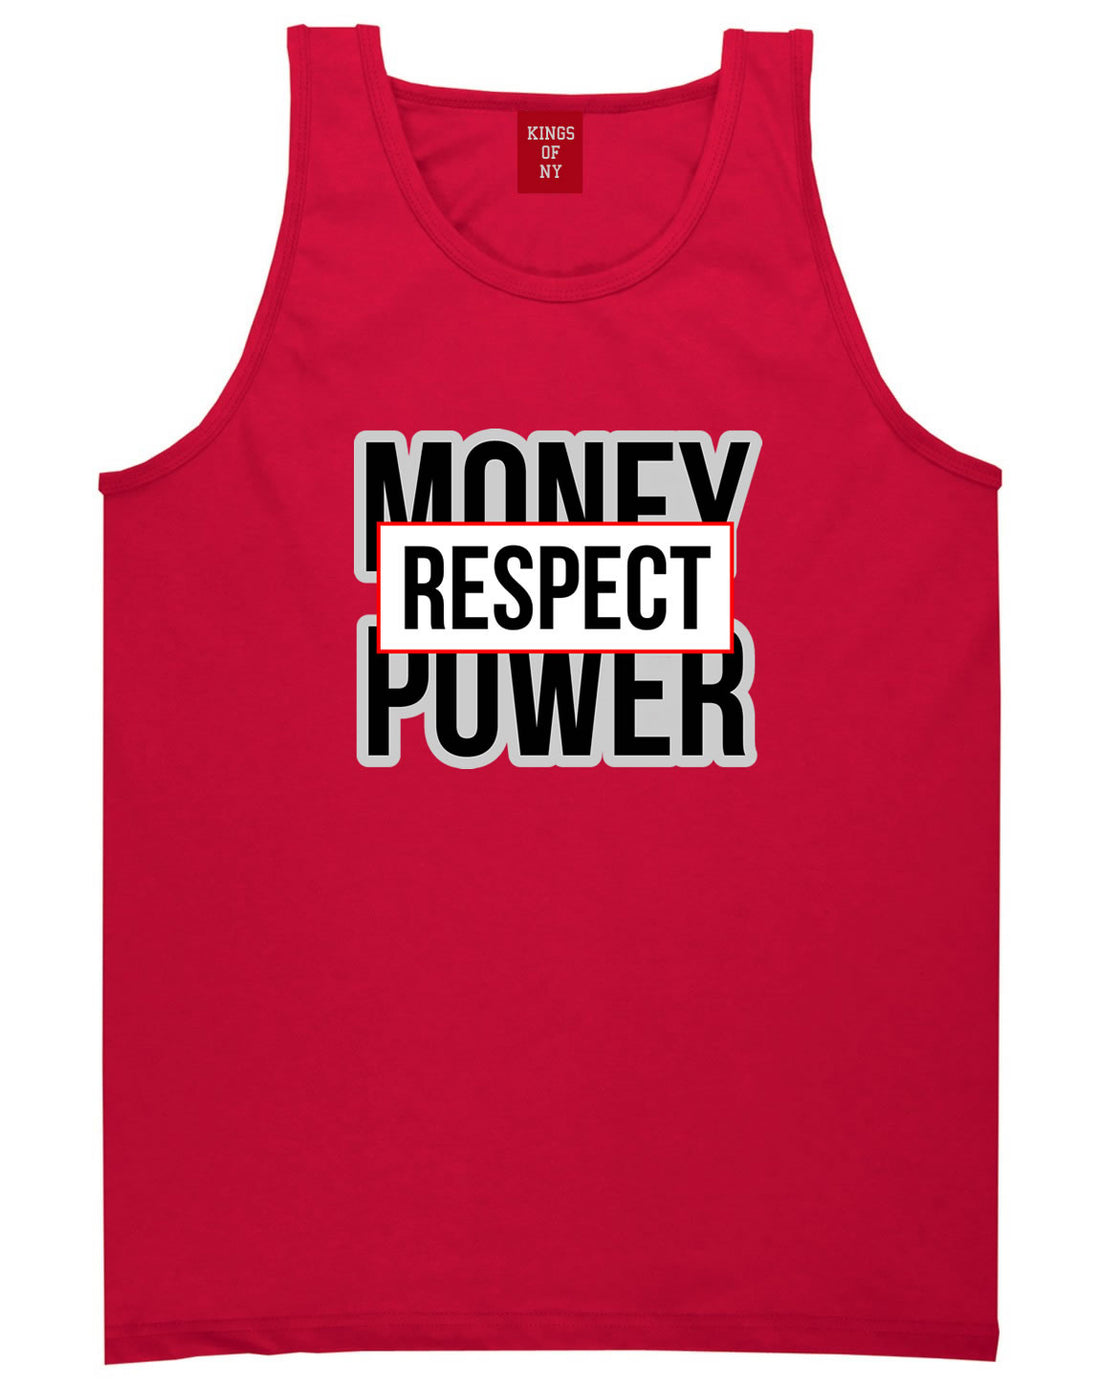 Money Power Respect Tank Top in Red By Kings Of NY